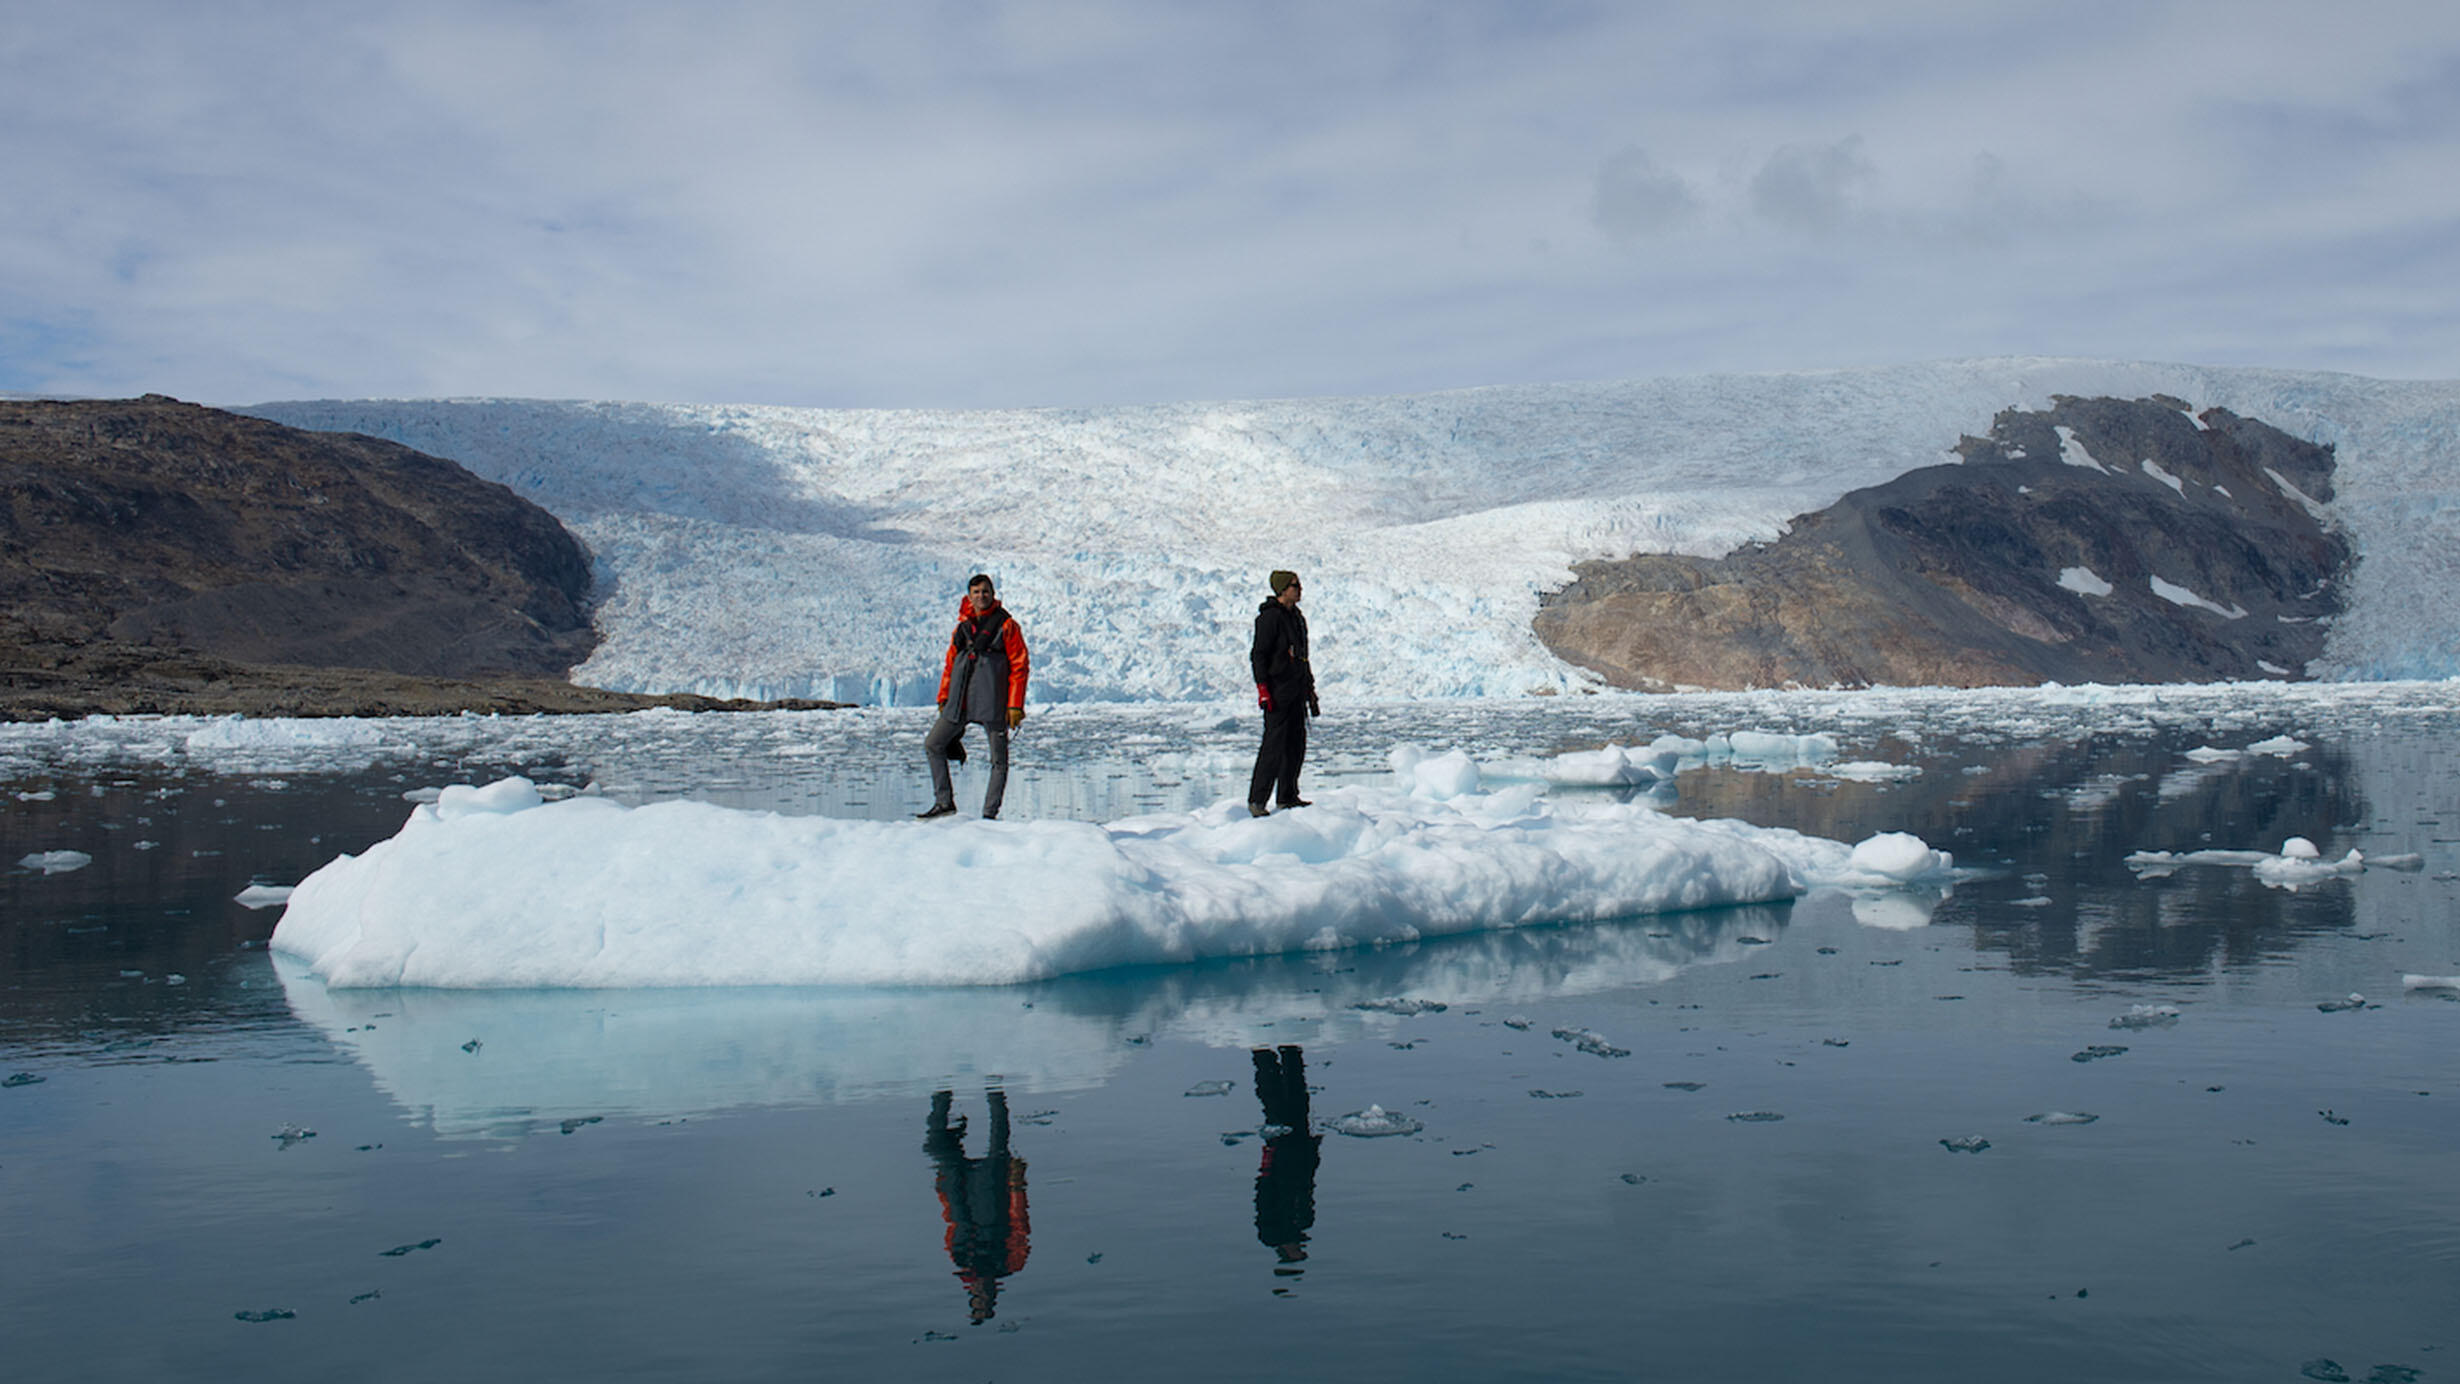 Two scientists in winter gear stand on an iceberg outcrop.